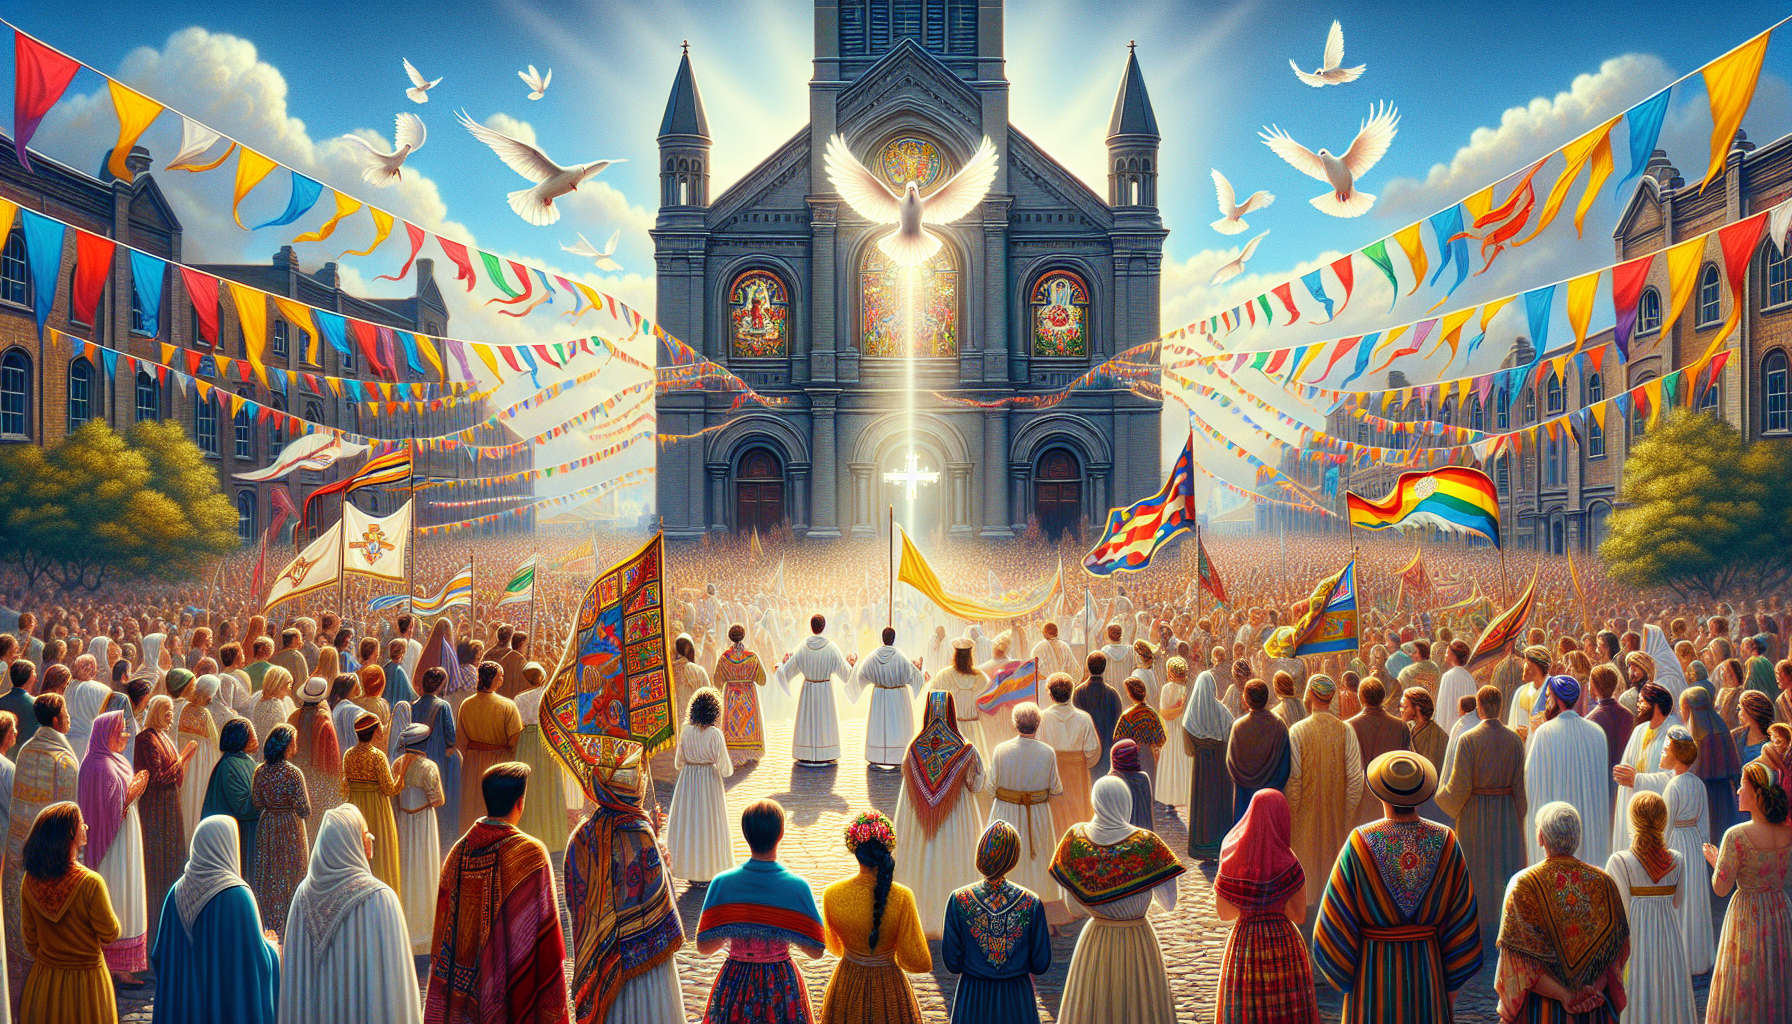 Create an image depicting a vibrant and festive religious celebration of the Holy Trinity. The scene should include colorful banners, people in traditional attire, and a grand church in the background